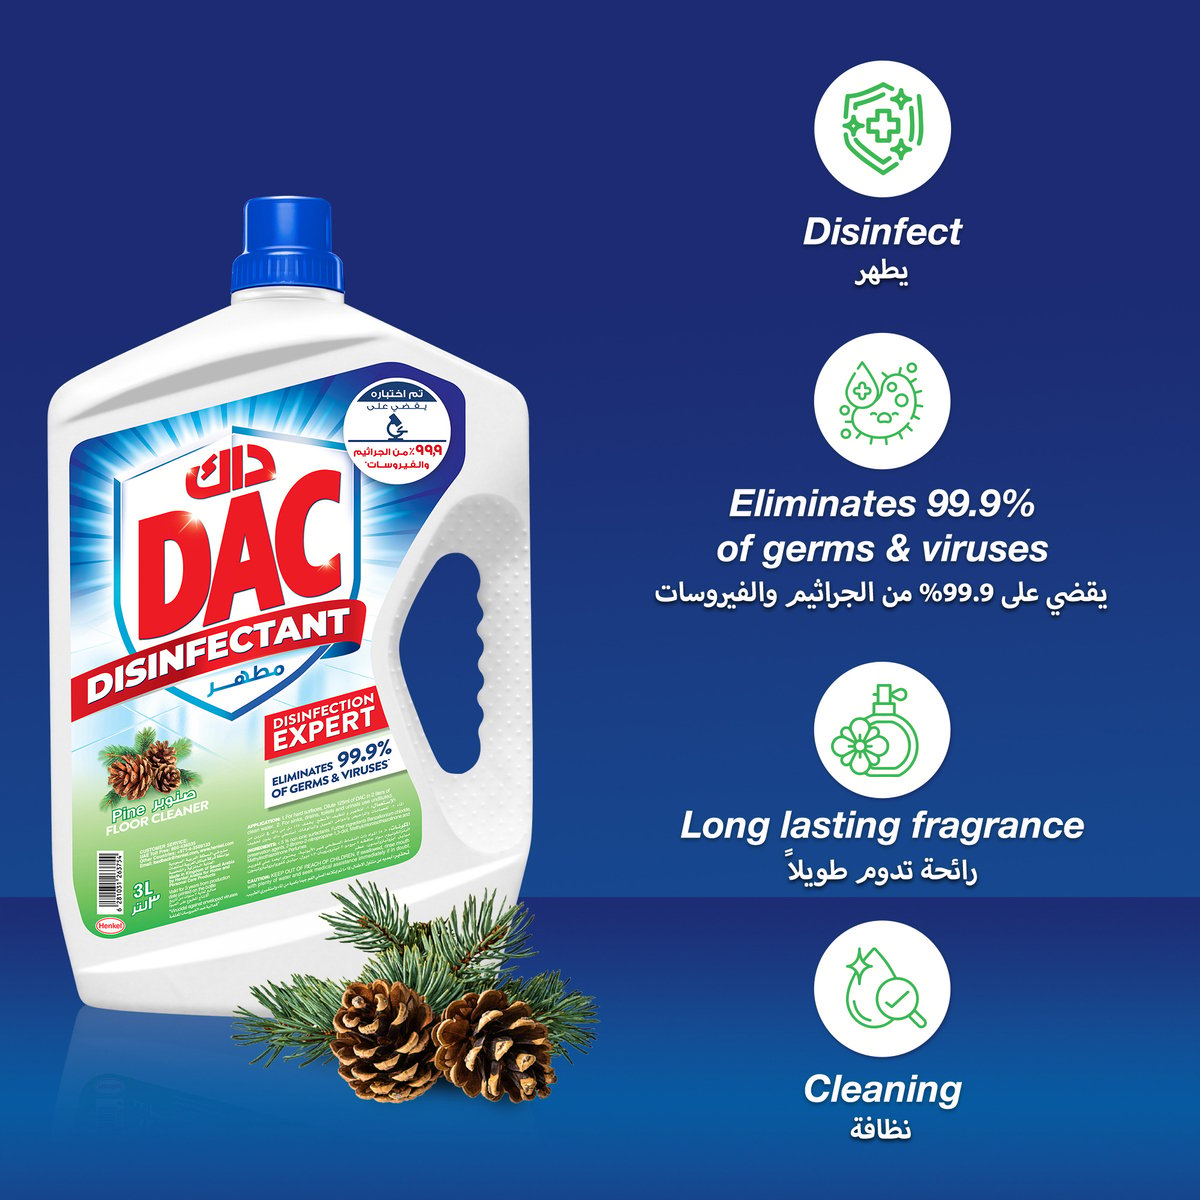 Dac Pine Disinfectant Value Pack 4.5 Litres